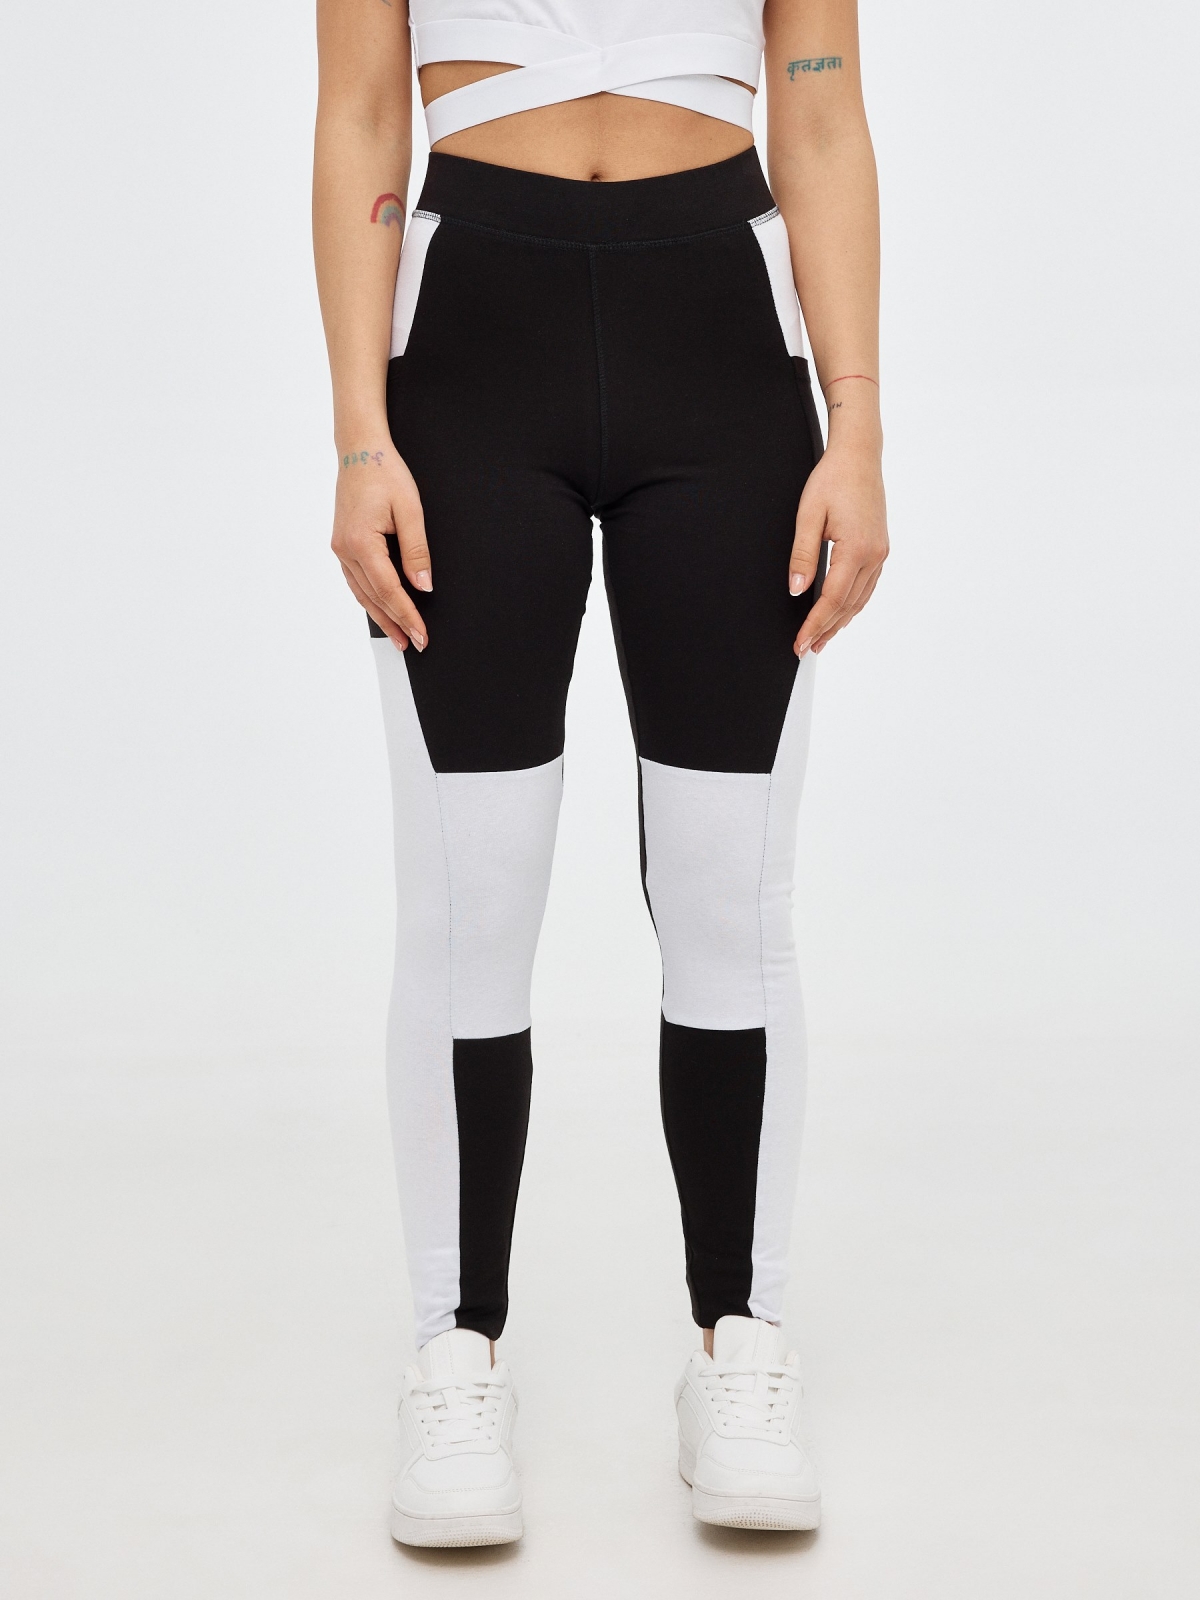 Legging with pockets black middle front view